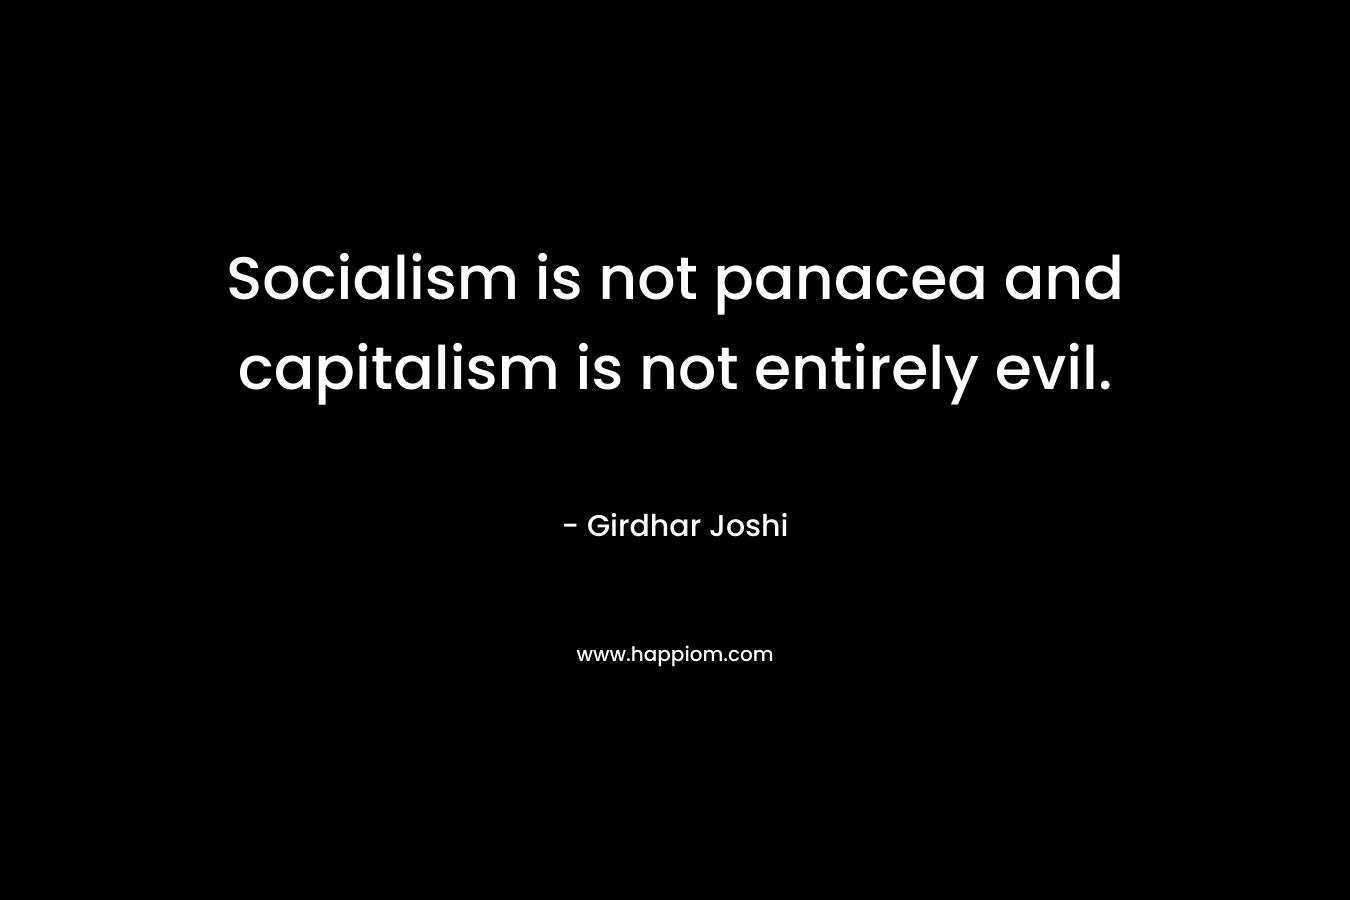 Socialism is not panacea and capitalism is not entirely evil. – Girdhar Joshi